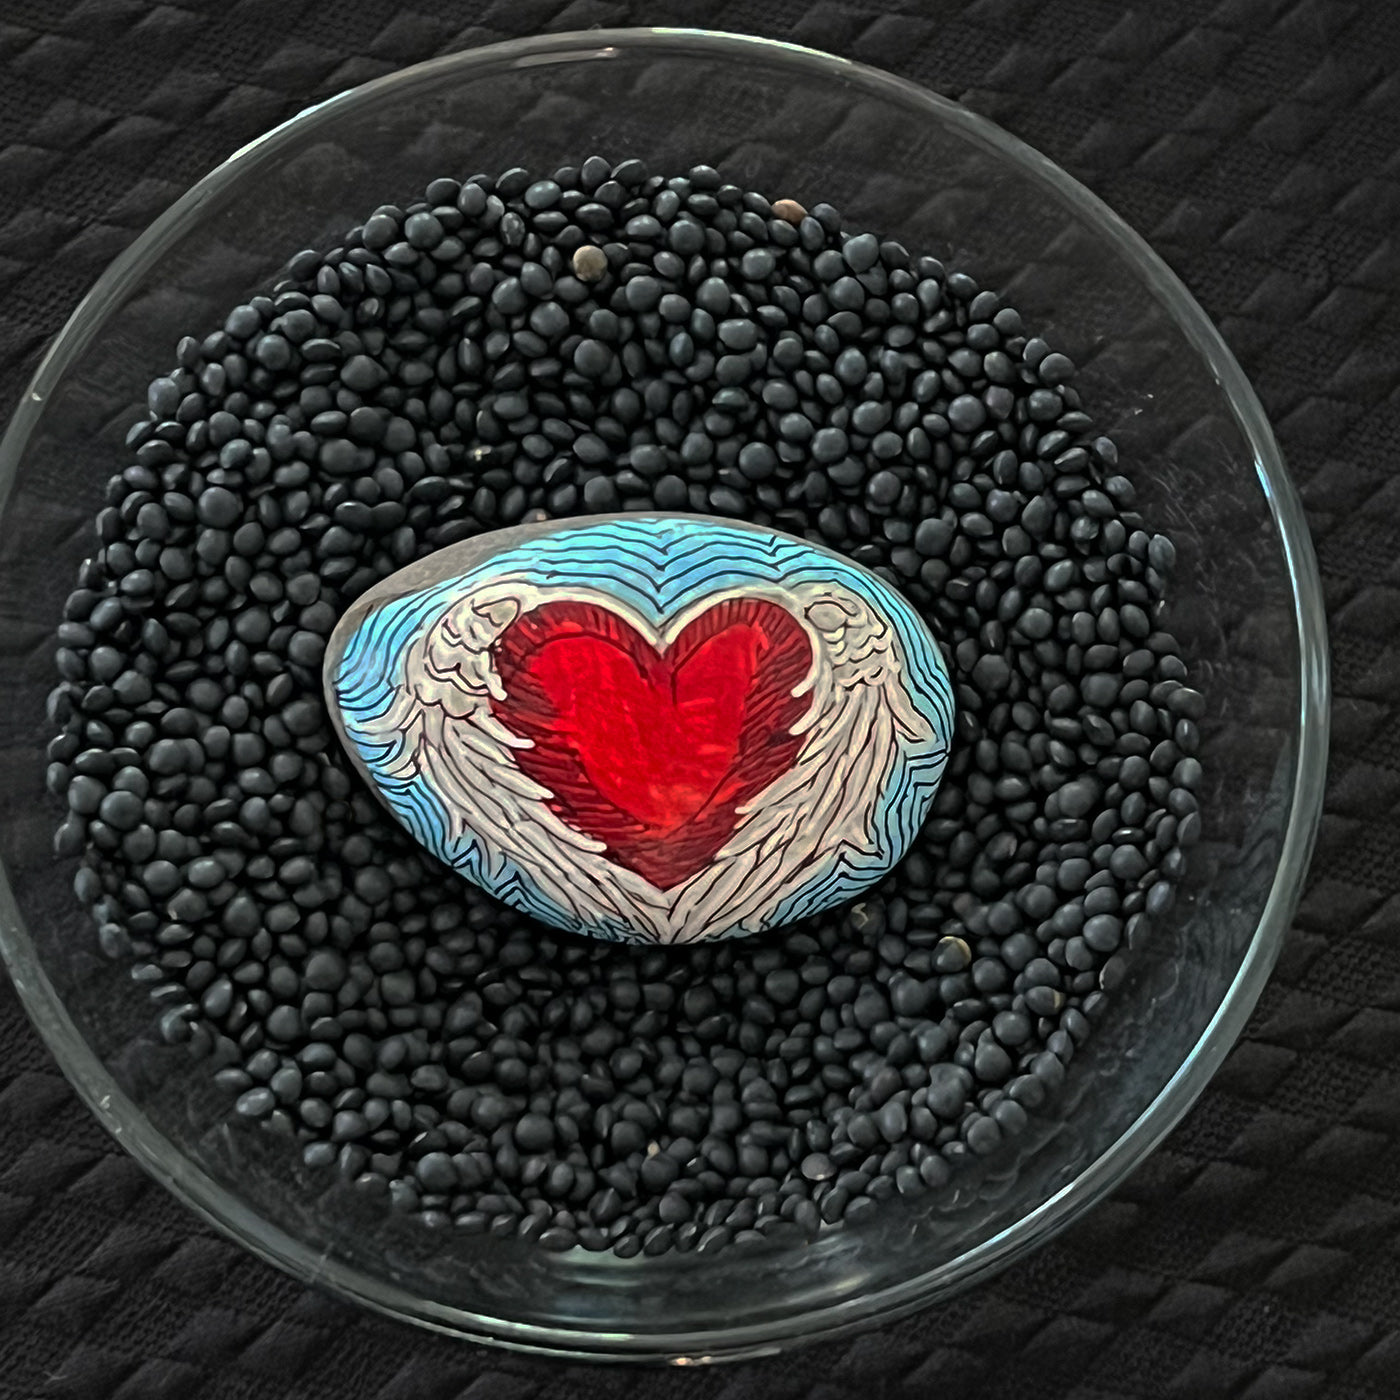 Hand painted stone - "Heart with Wings"